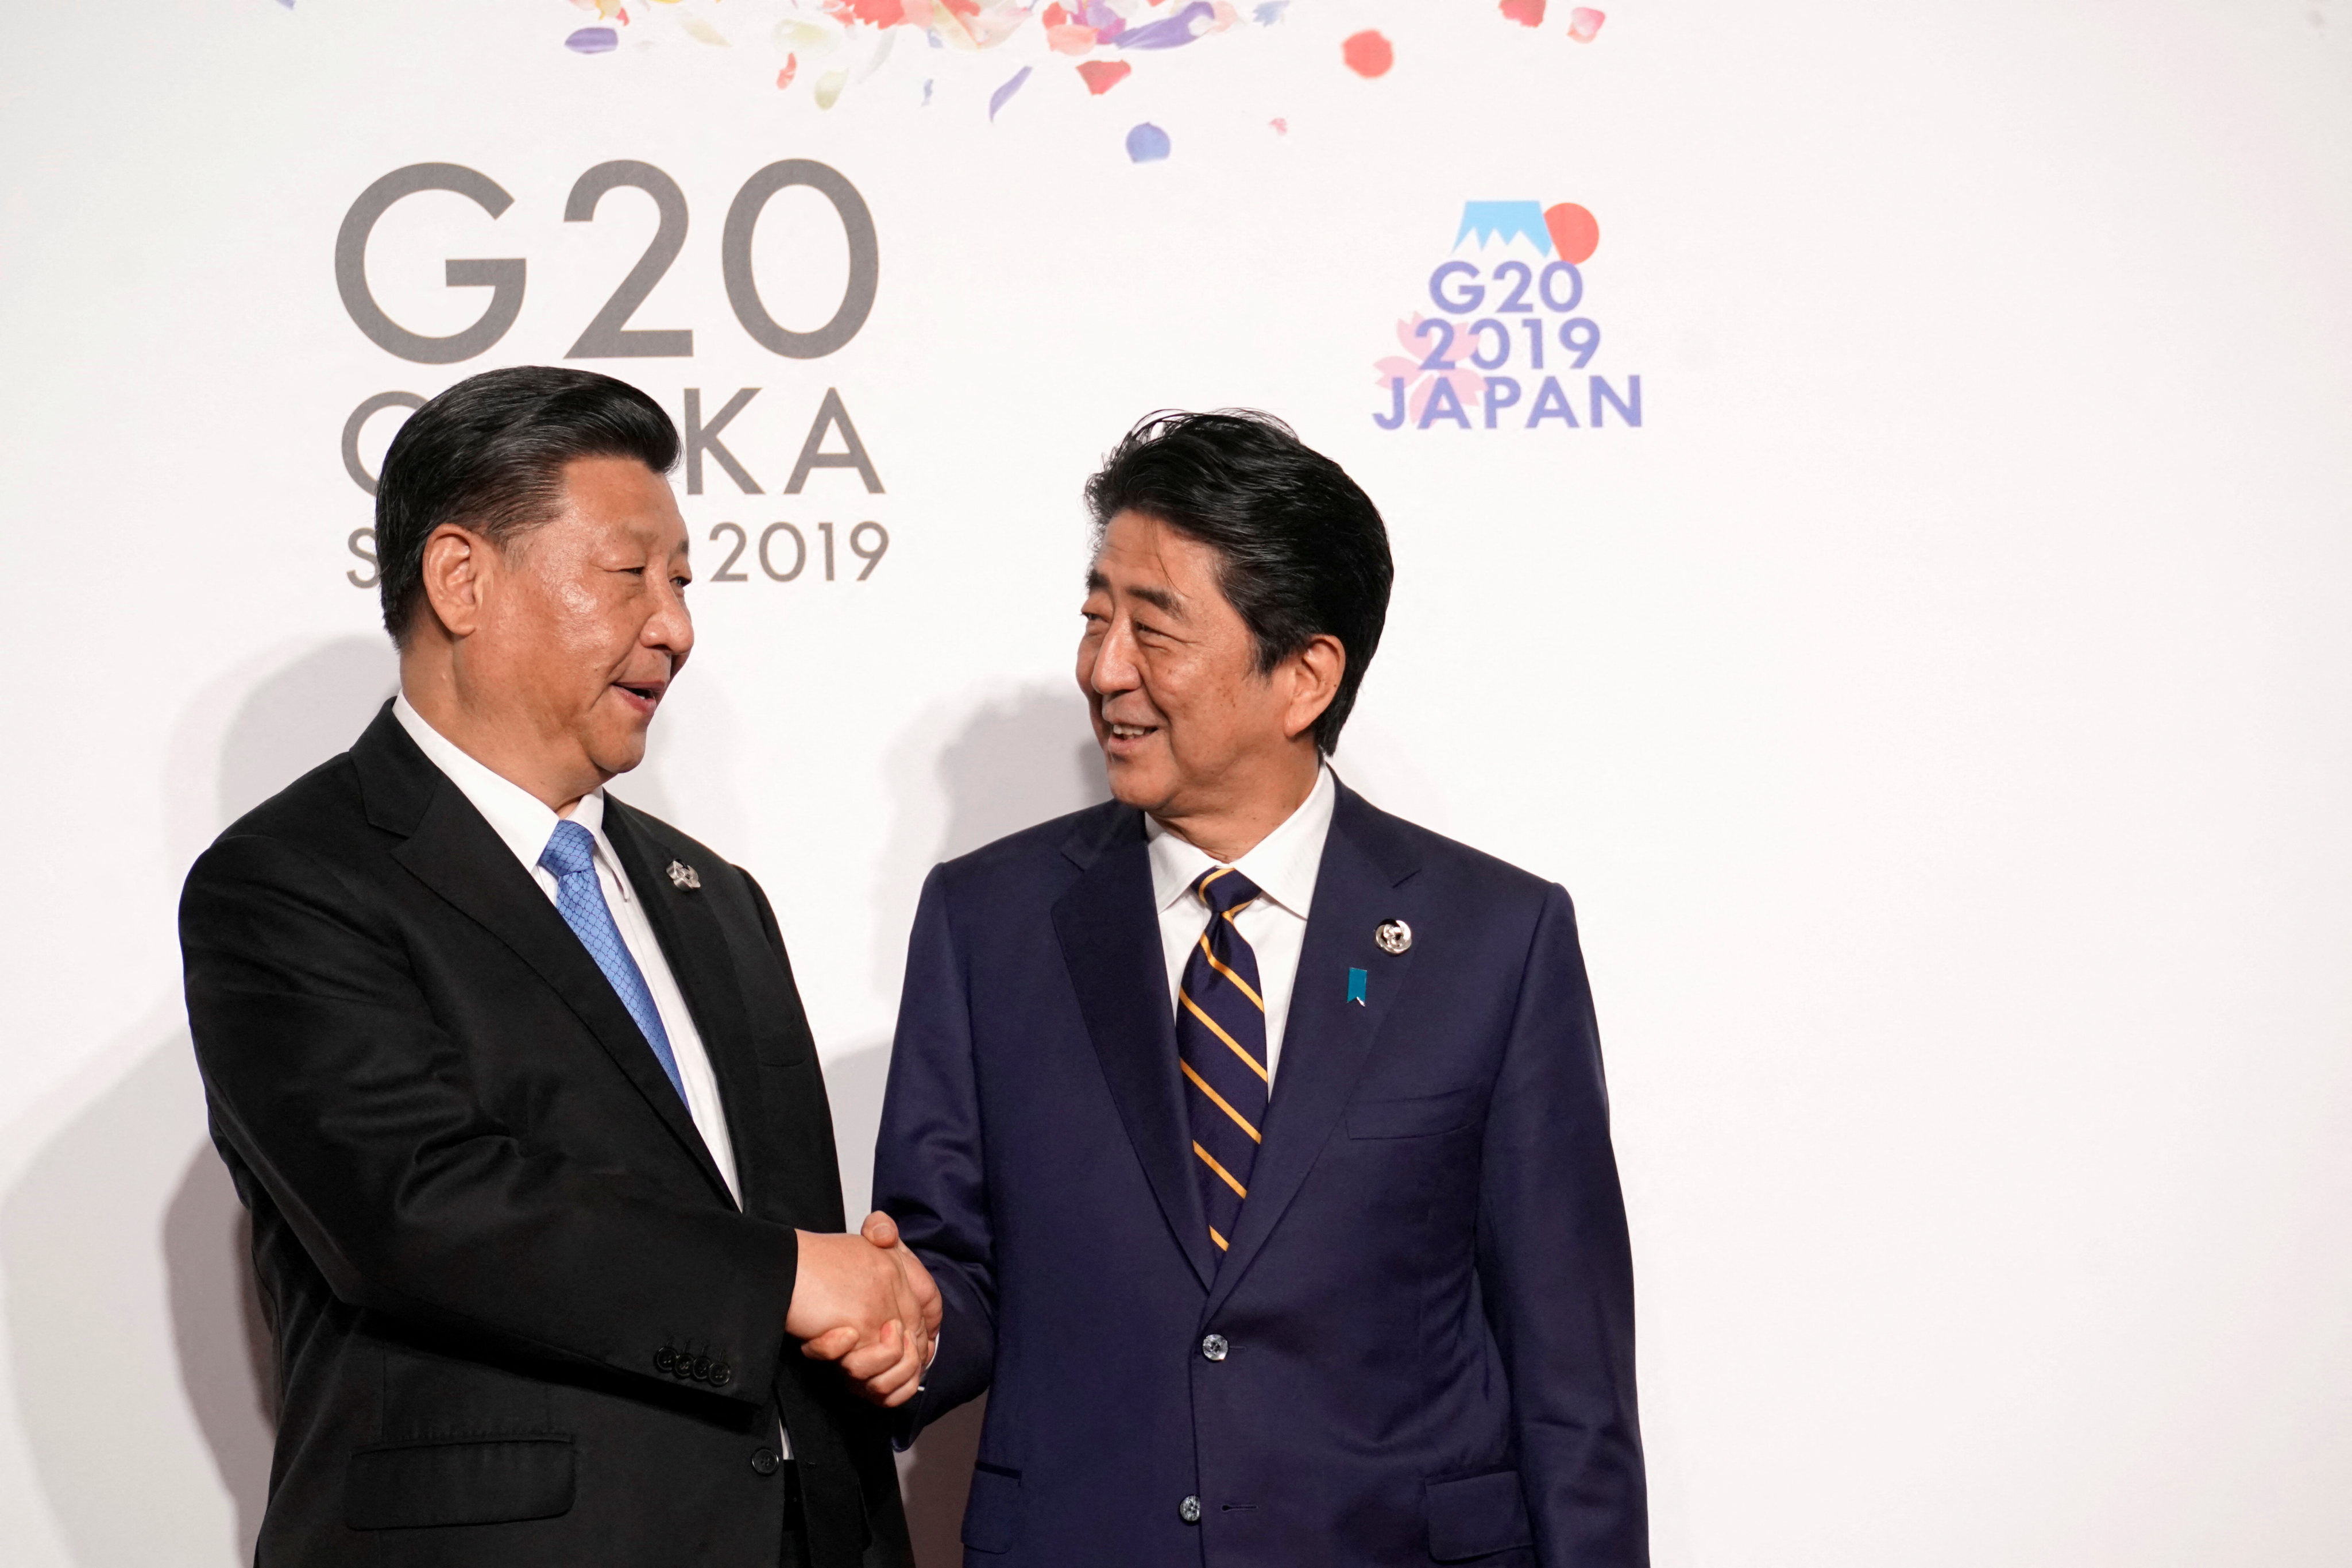 The three-pronged approach adopted by former Japanese prime minister Shinzo Abe has long been cited by Chinese policy advisers as a warning against unconventional policy loosening even before Friday’s assassination. Photo: Reuters